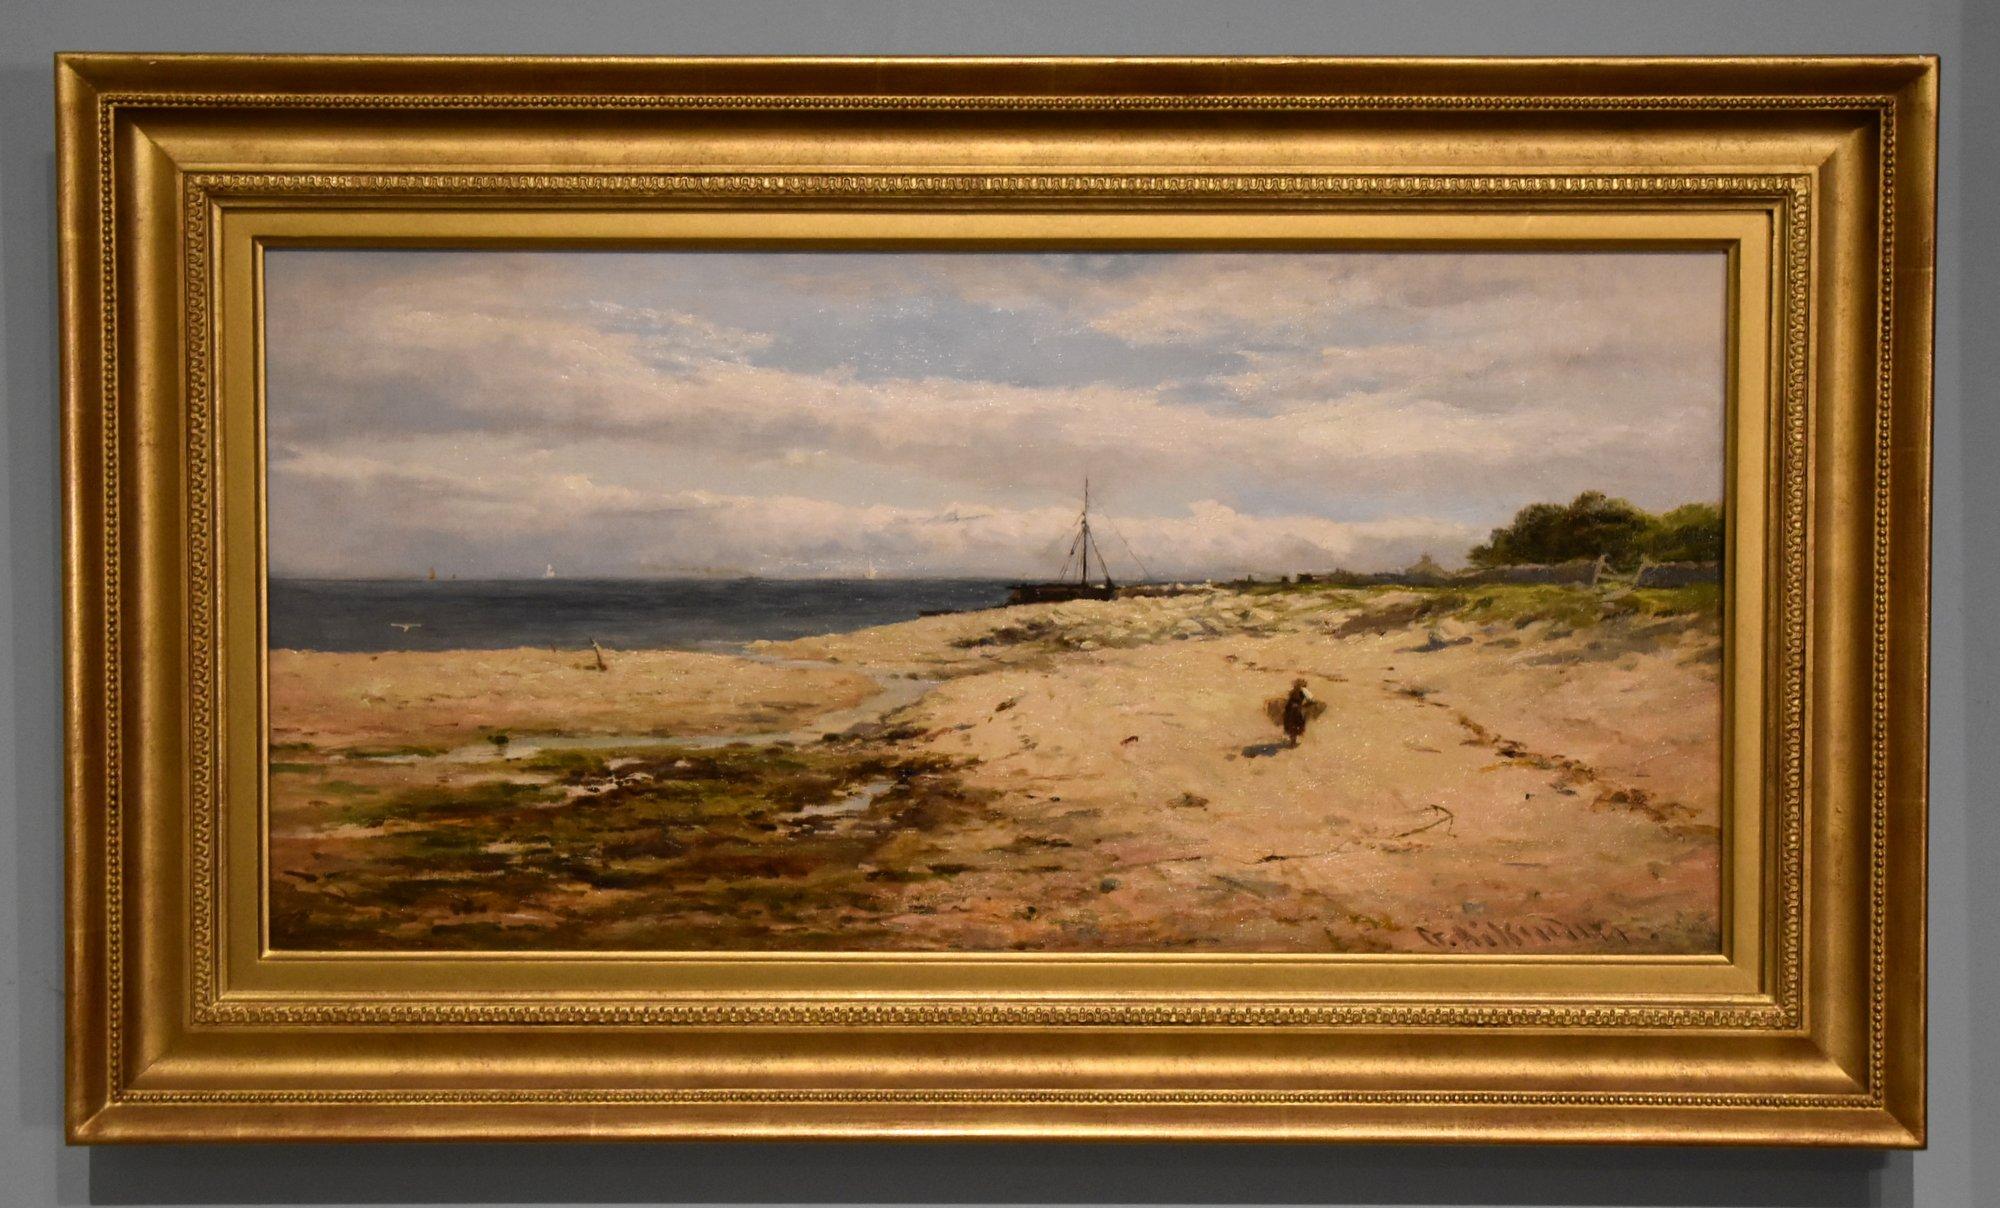 Oil Painting by George Aikman "A Scottish Coastal View" 1830 - 1905 A George Aikman was a Scottish painter and illustrator, associate member of the Royal Scottish Academy and exhibited R. A in London. Oil on canvas. Signed.

Dimensions unframed 13.5